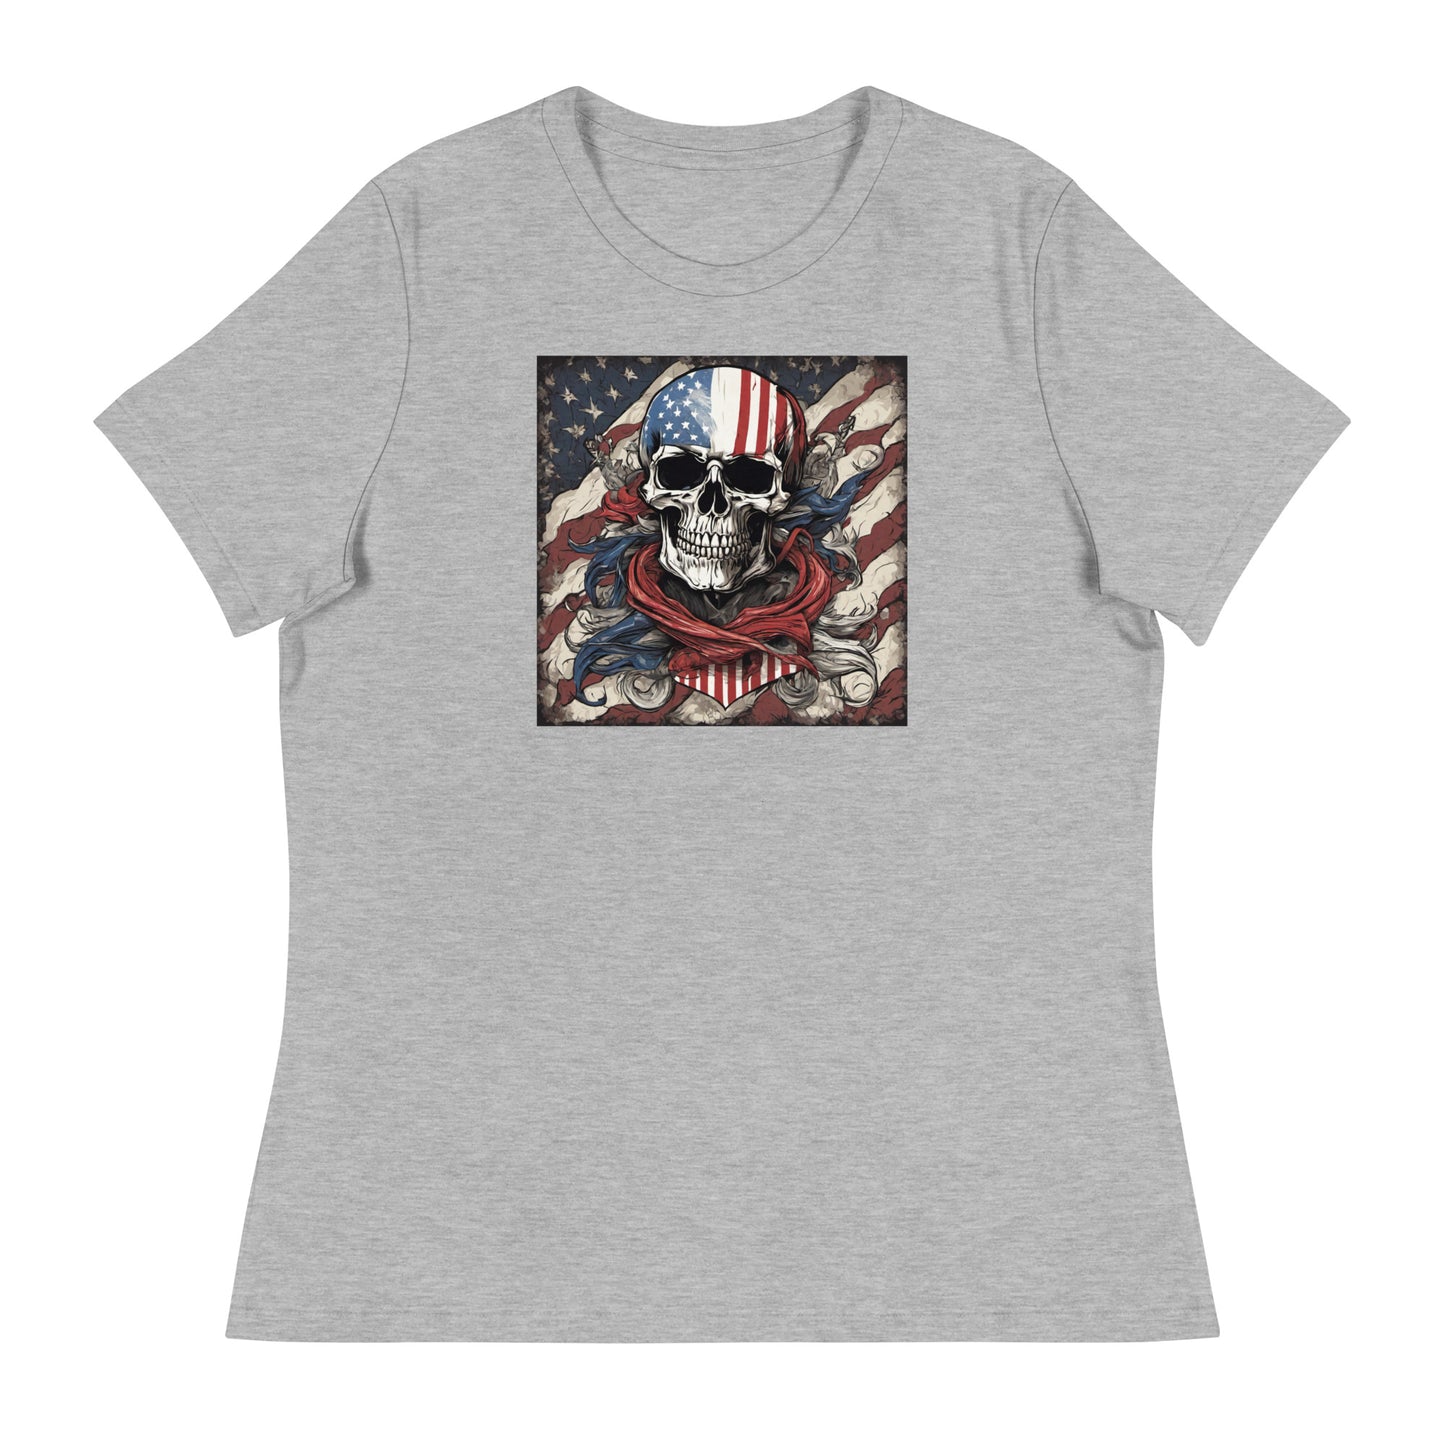 Red, White, & Blue Swashbuckler Women's T-Shirt Athletic Heather